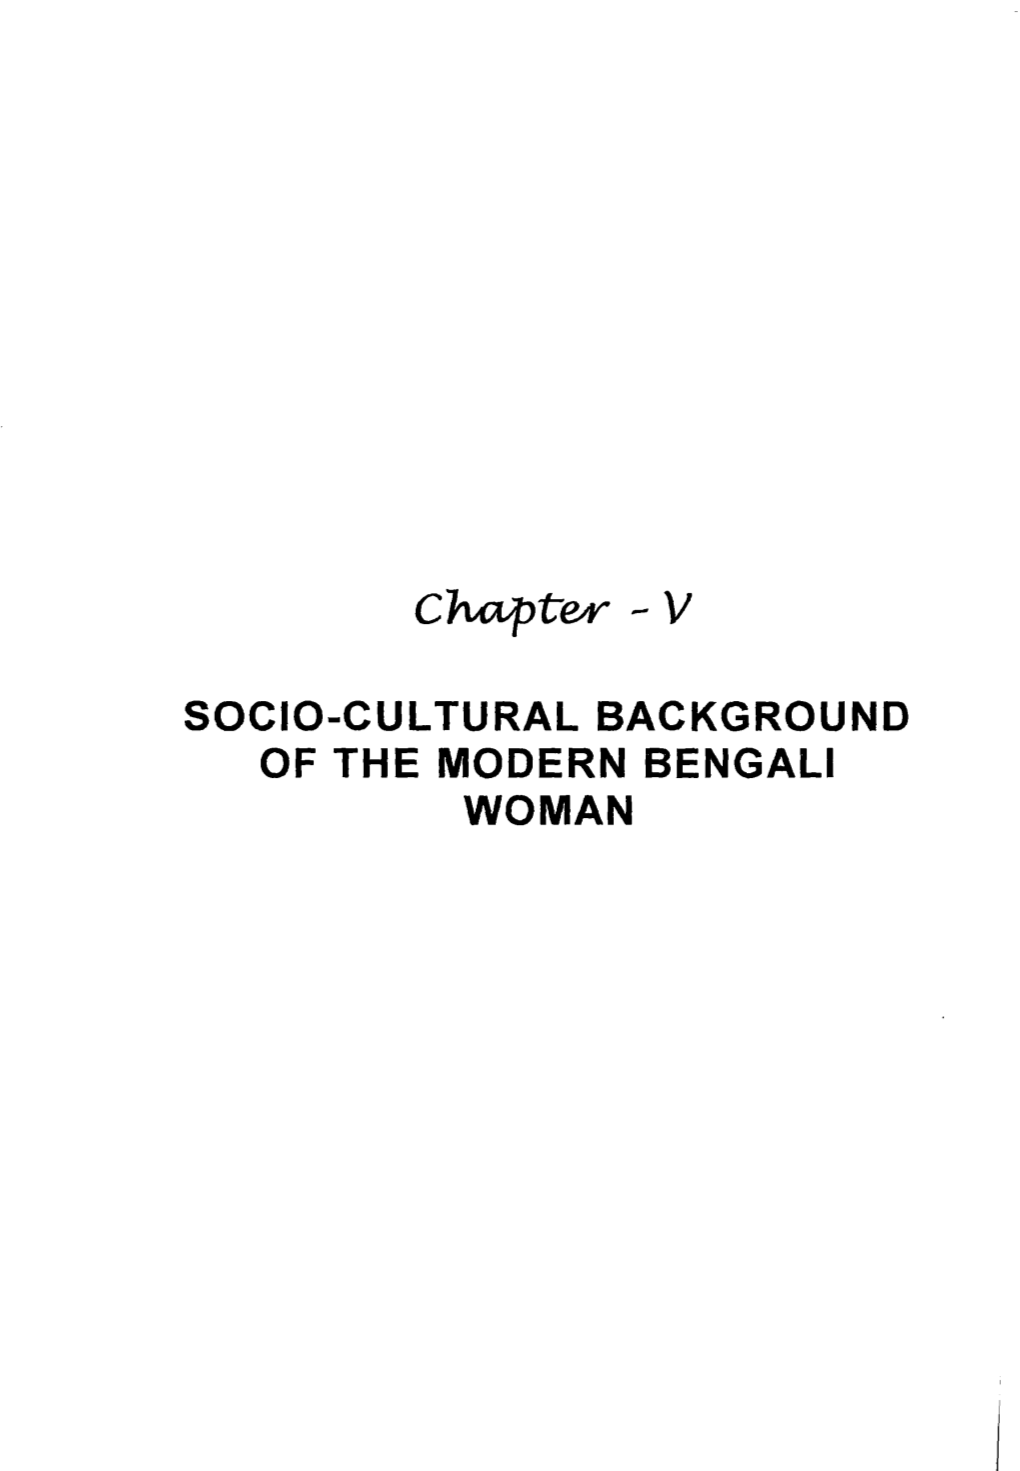 Socio-Cultural Background of the Modern Bengali Woman Socio - Cultural Background of the Modern Bengali Woman*